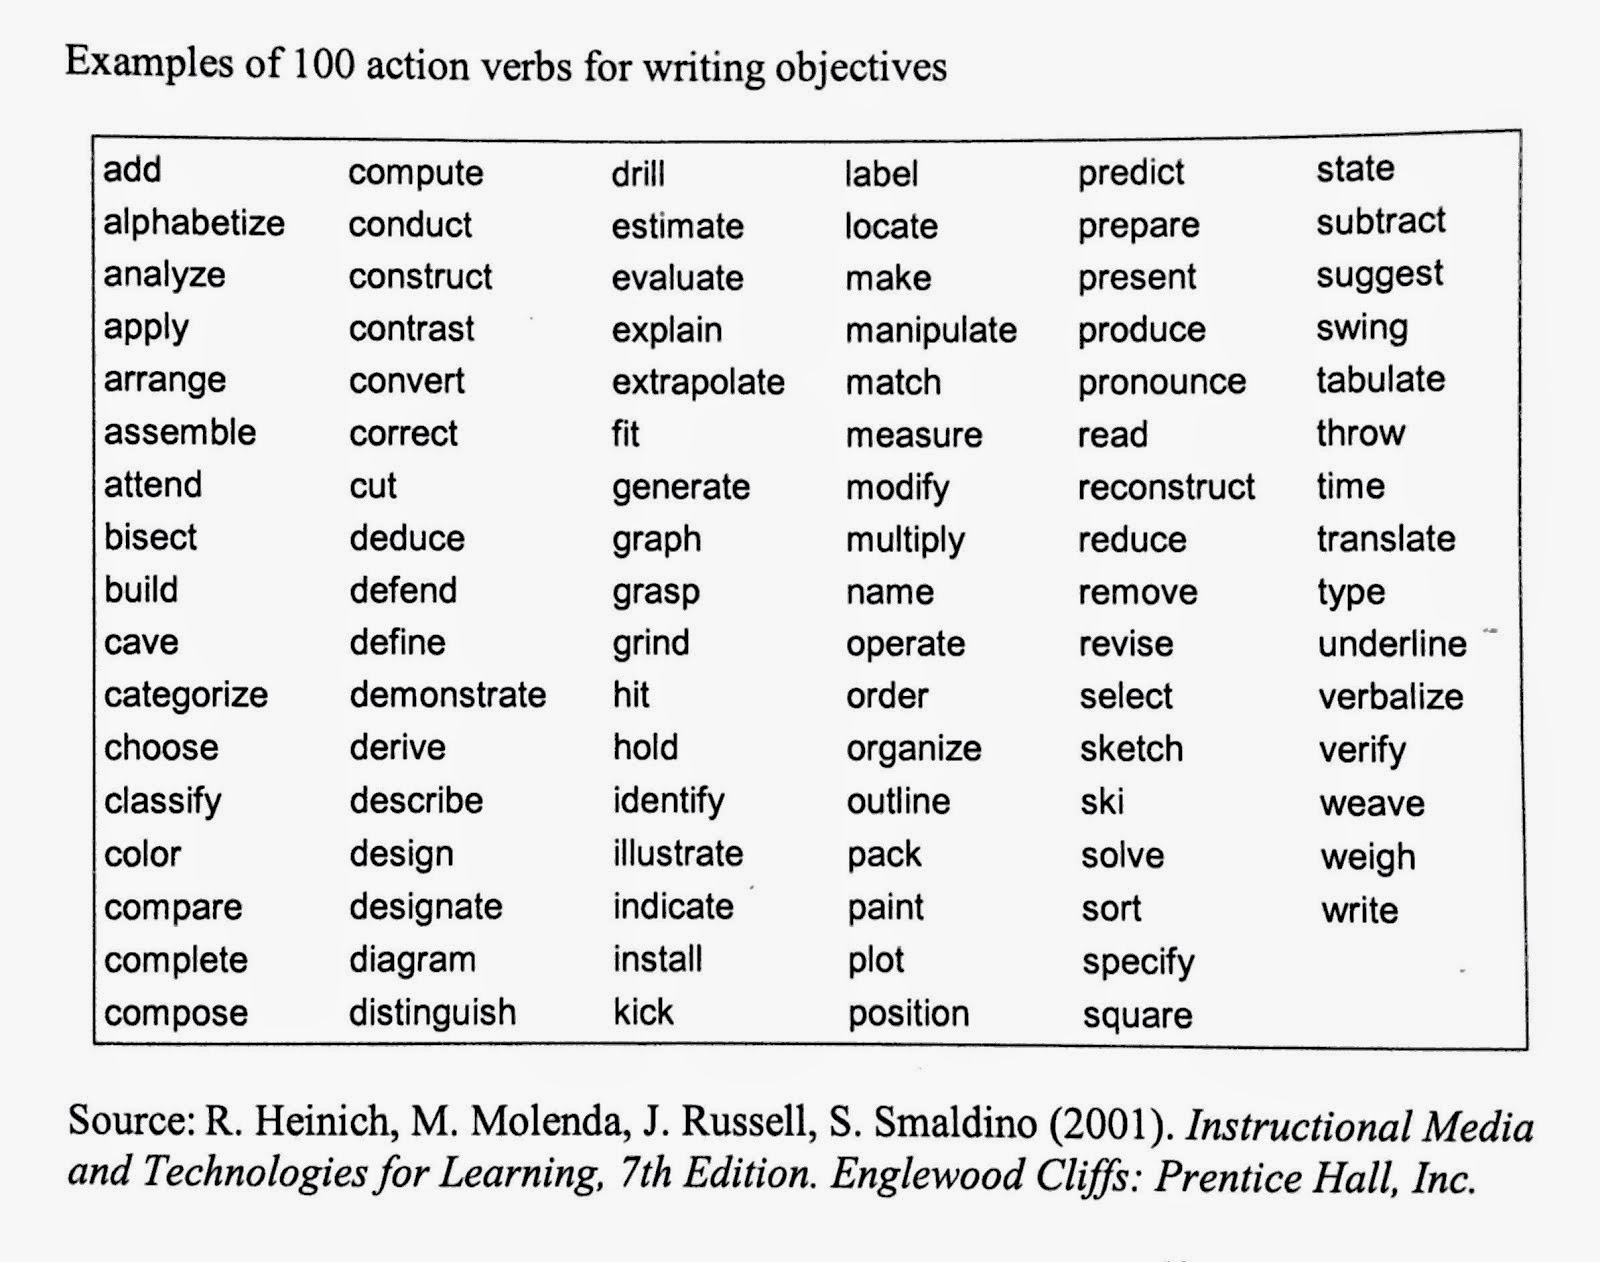 Non continuous verbs. State verbs таблица. State and Action verbs список. State verbs список. Non Action verbs список.